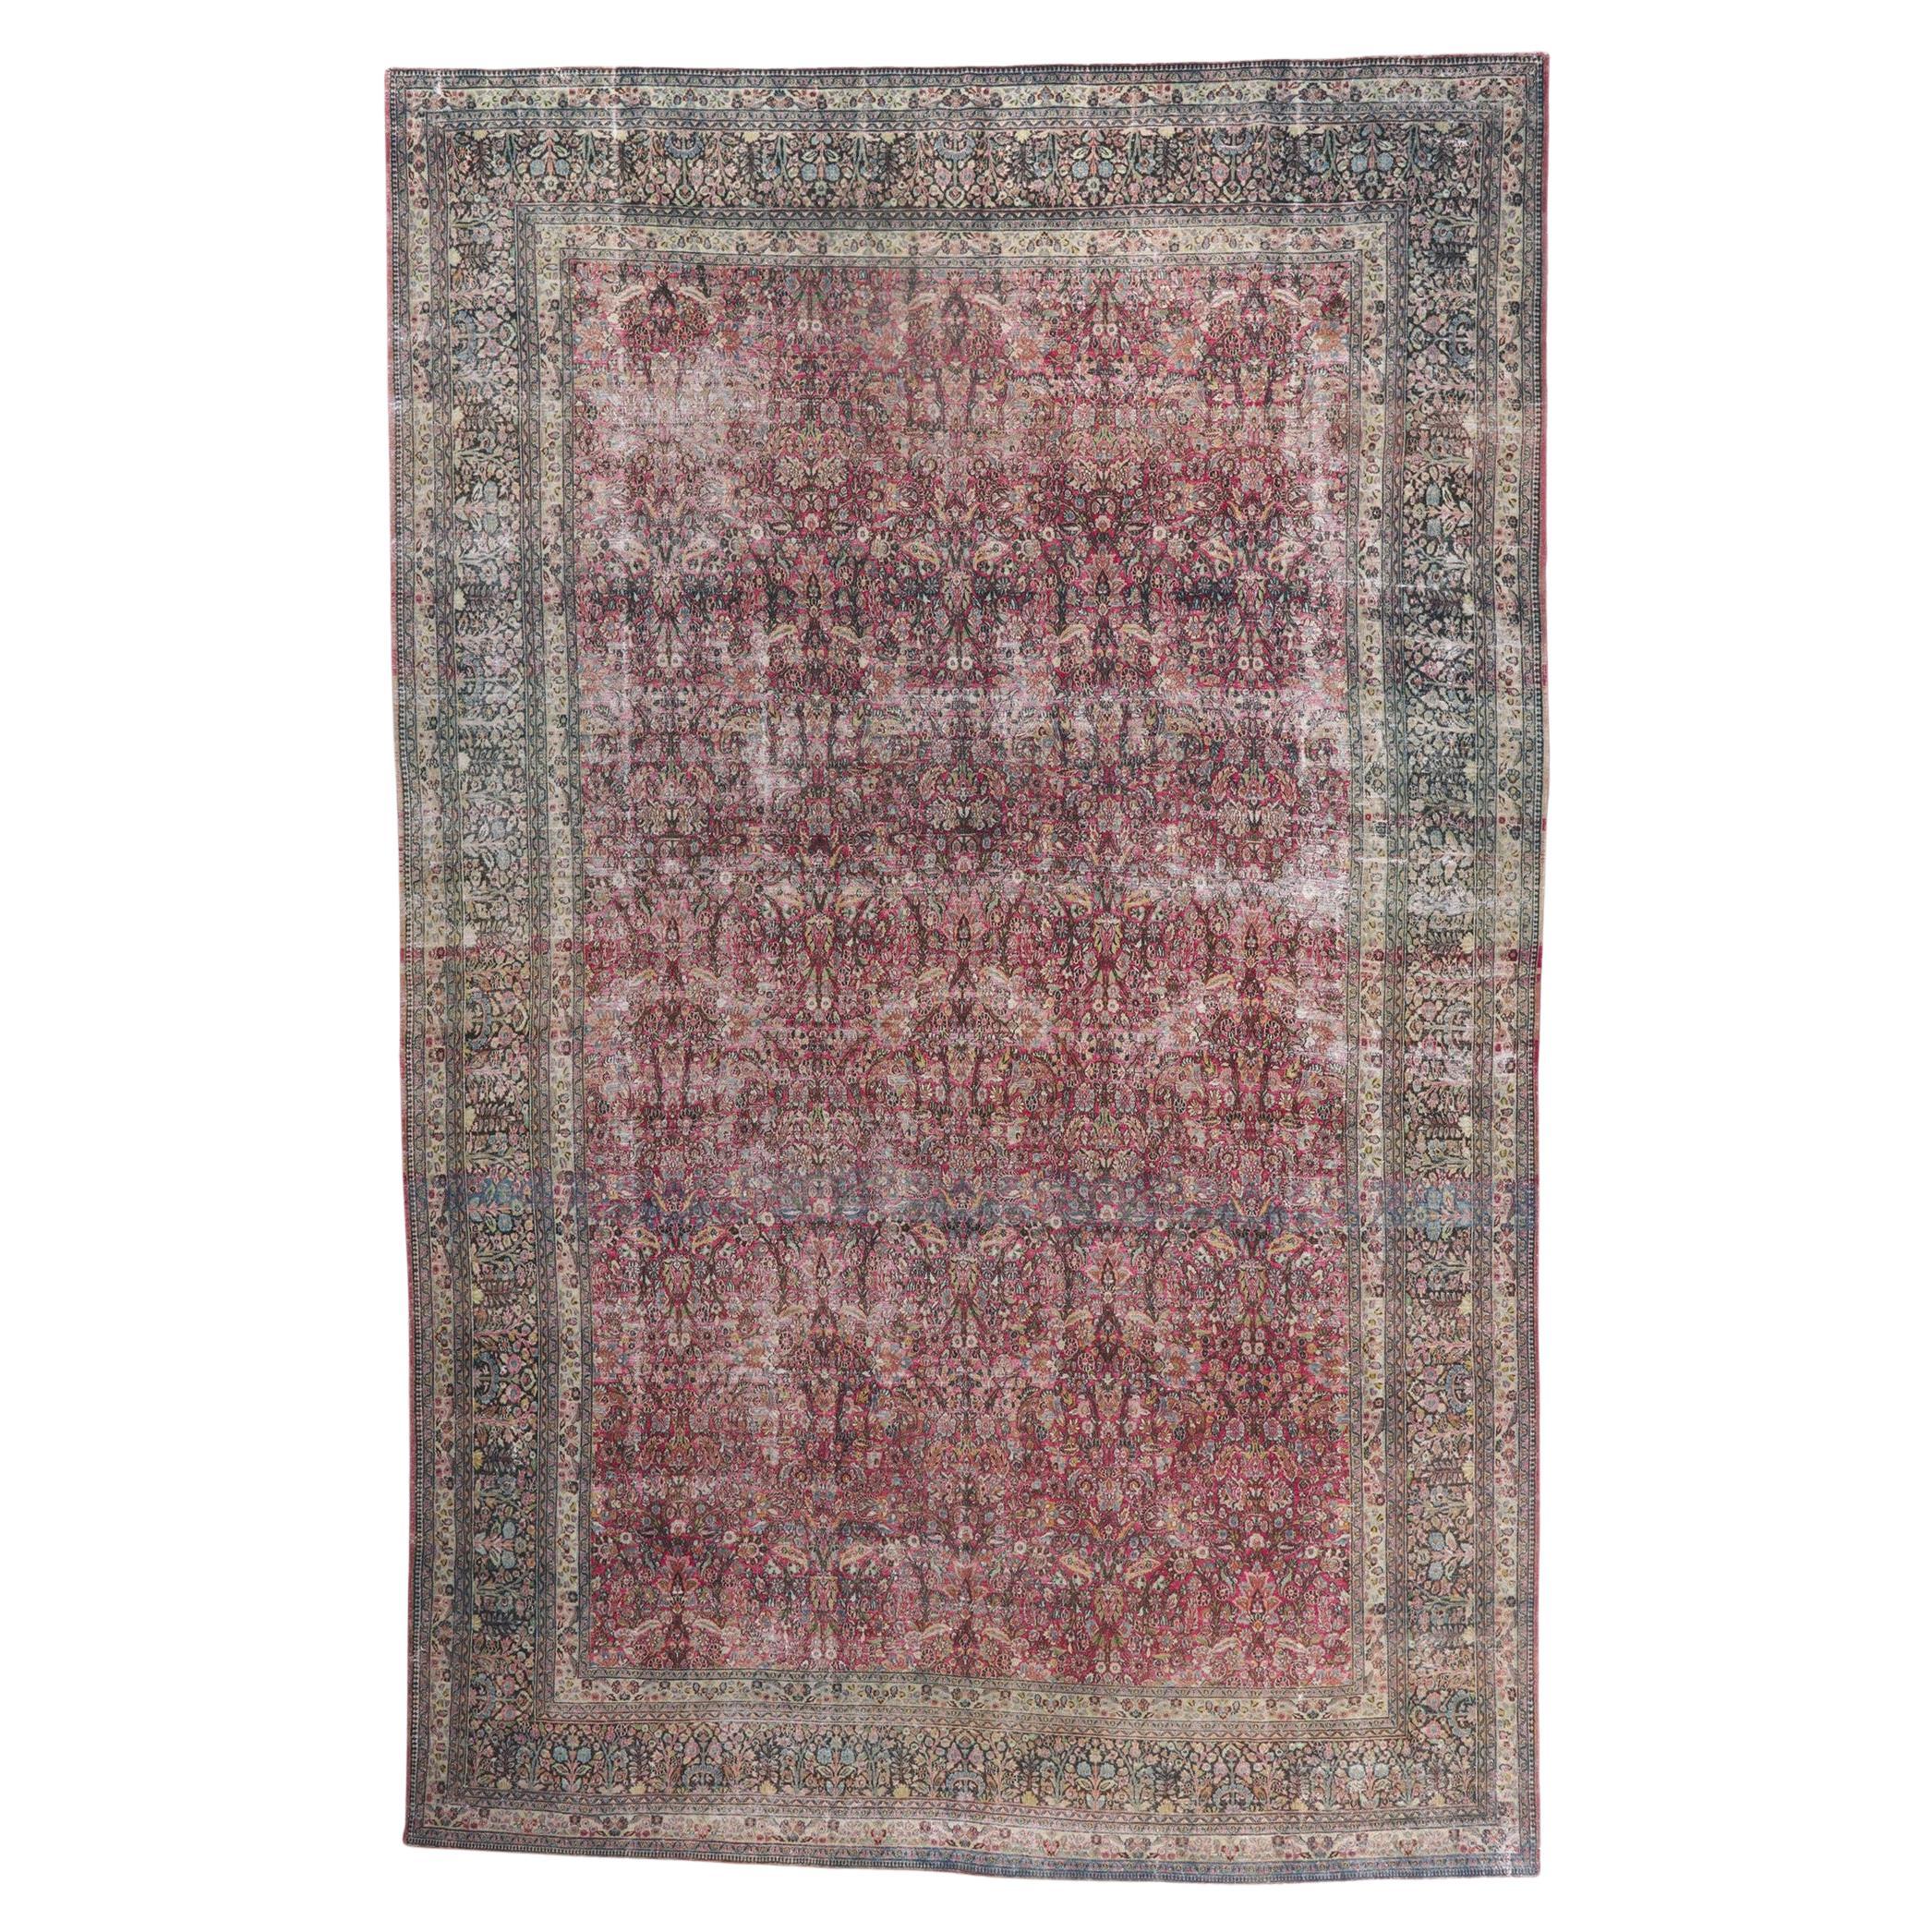 Antique-Worn Persian Khorassan Rug, Victorian Elegance Meets Weathered Finesse